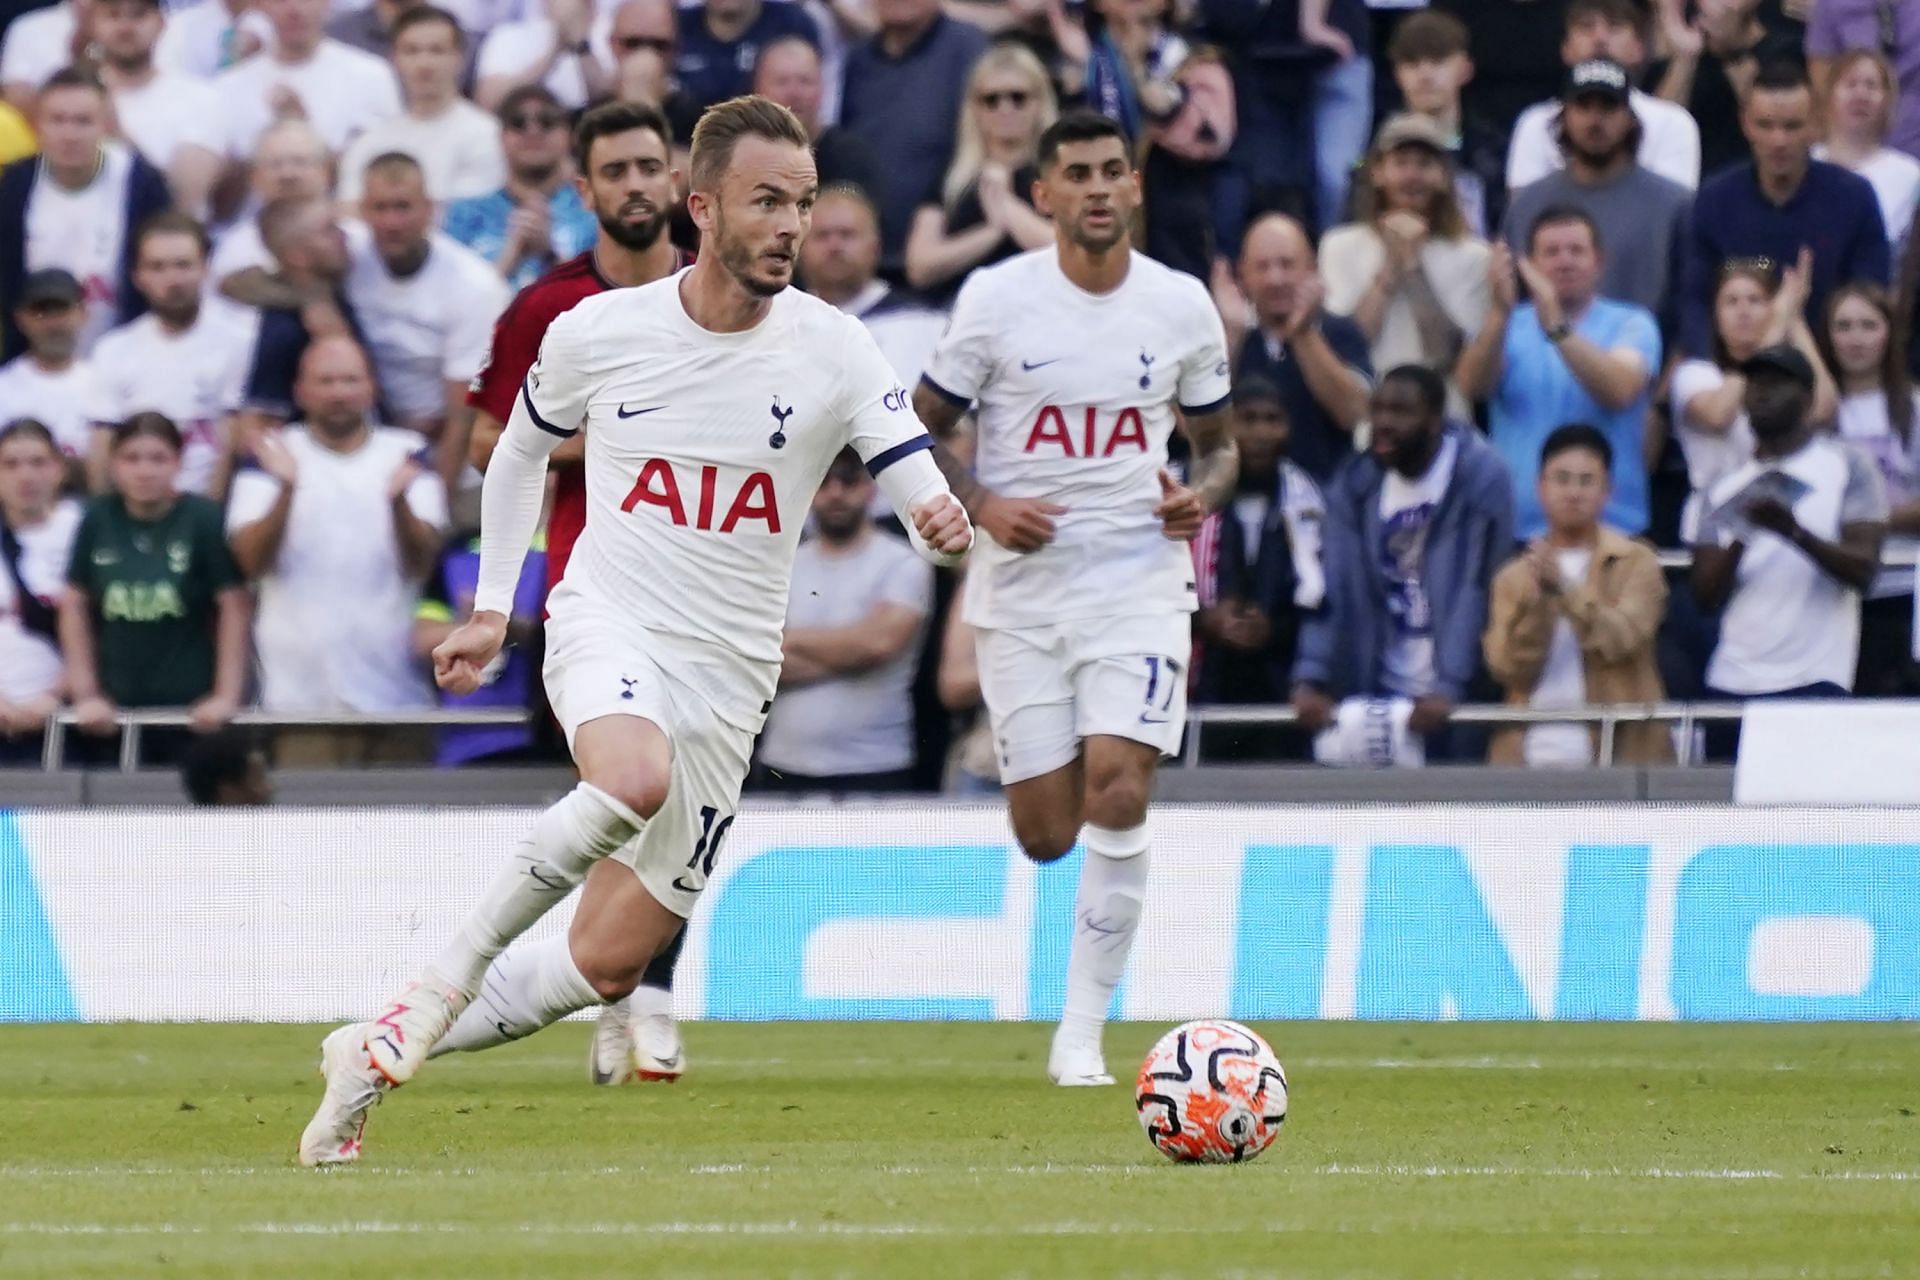 Bournemouth take on Tottenham Hotspur this weekend